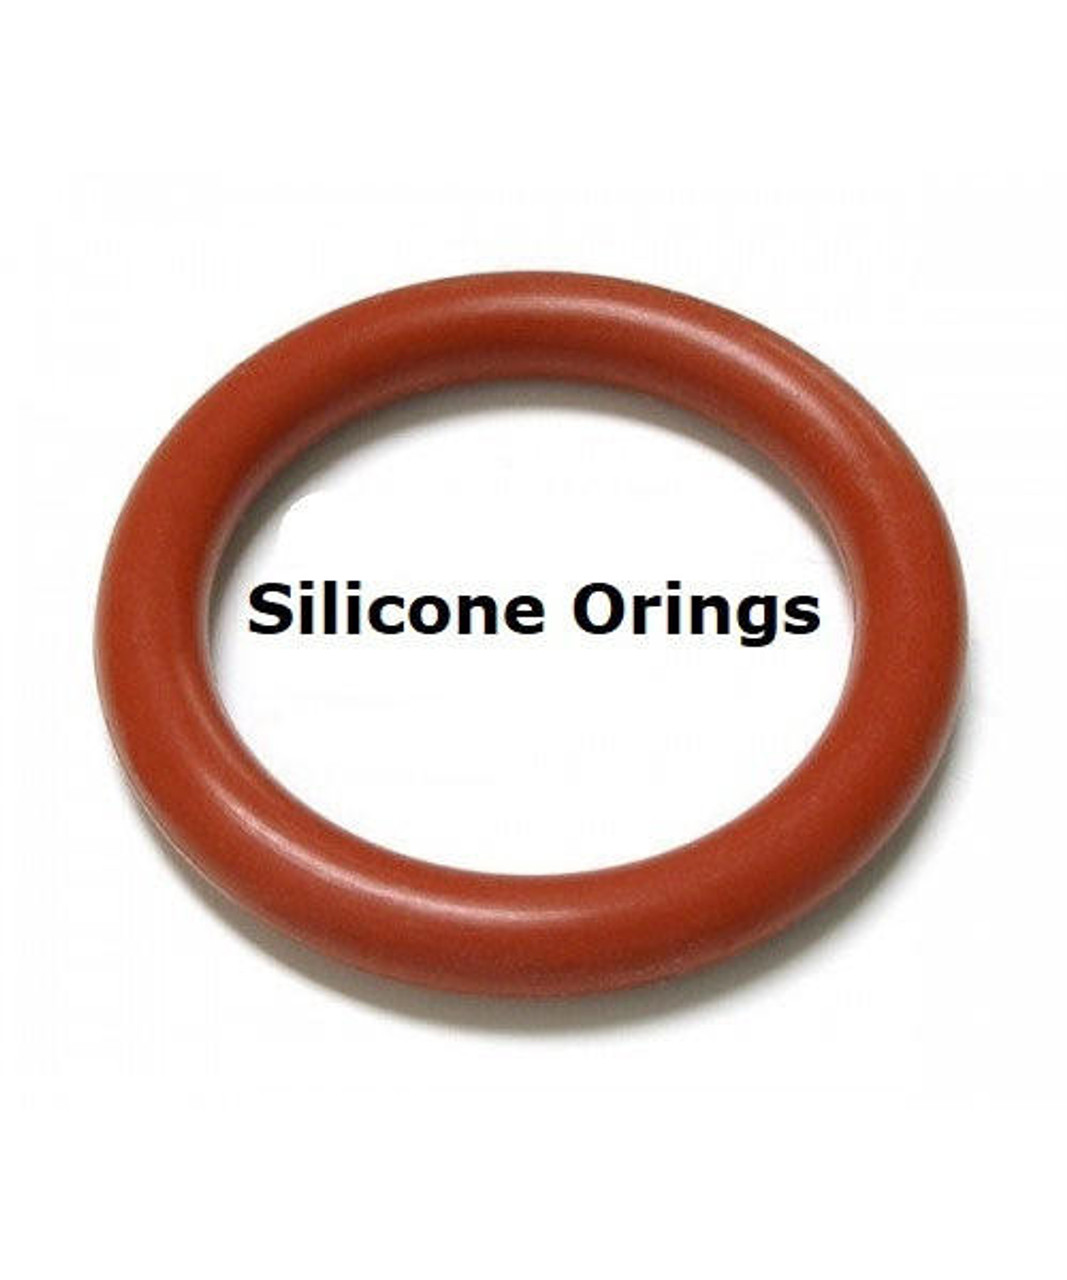 Silicone O-rings Size 378 Price for 1 pc